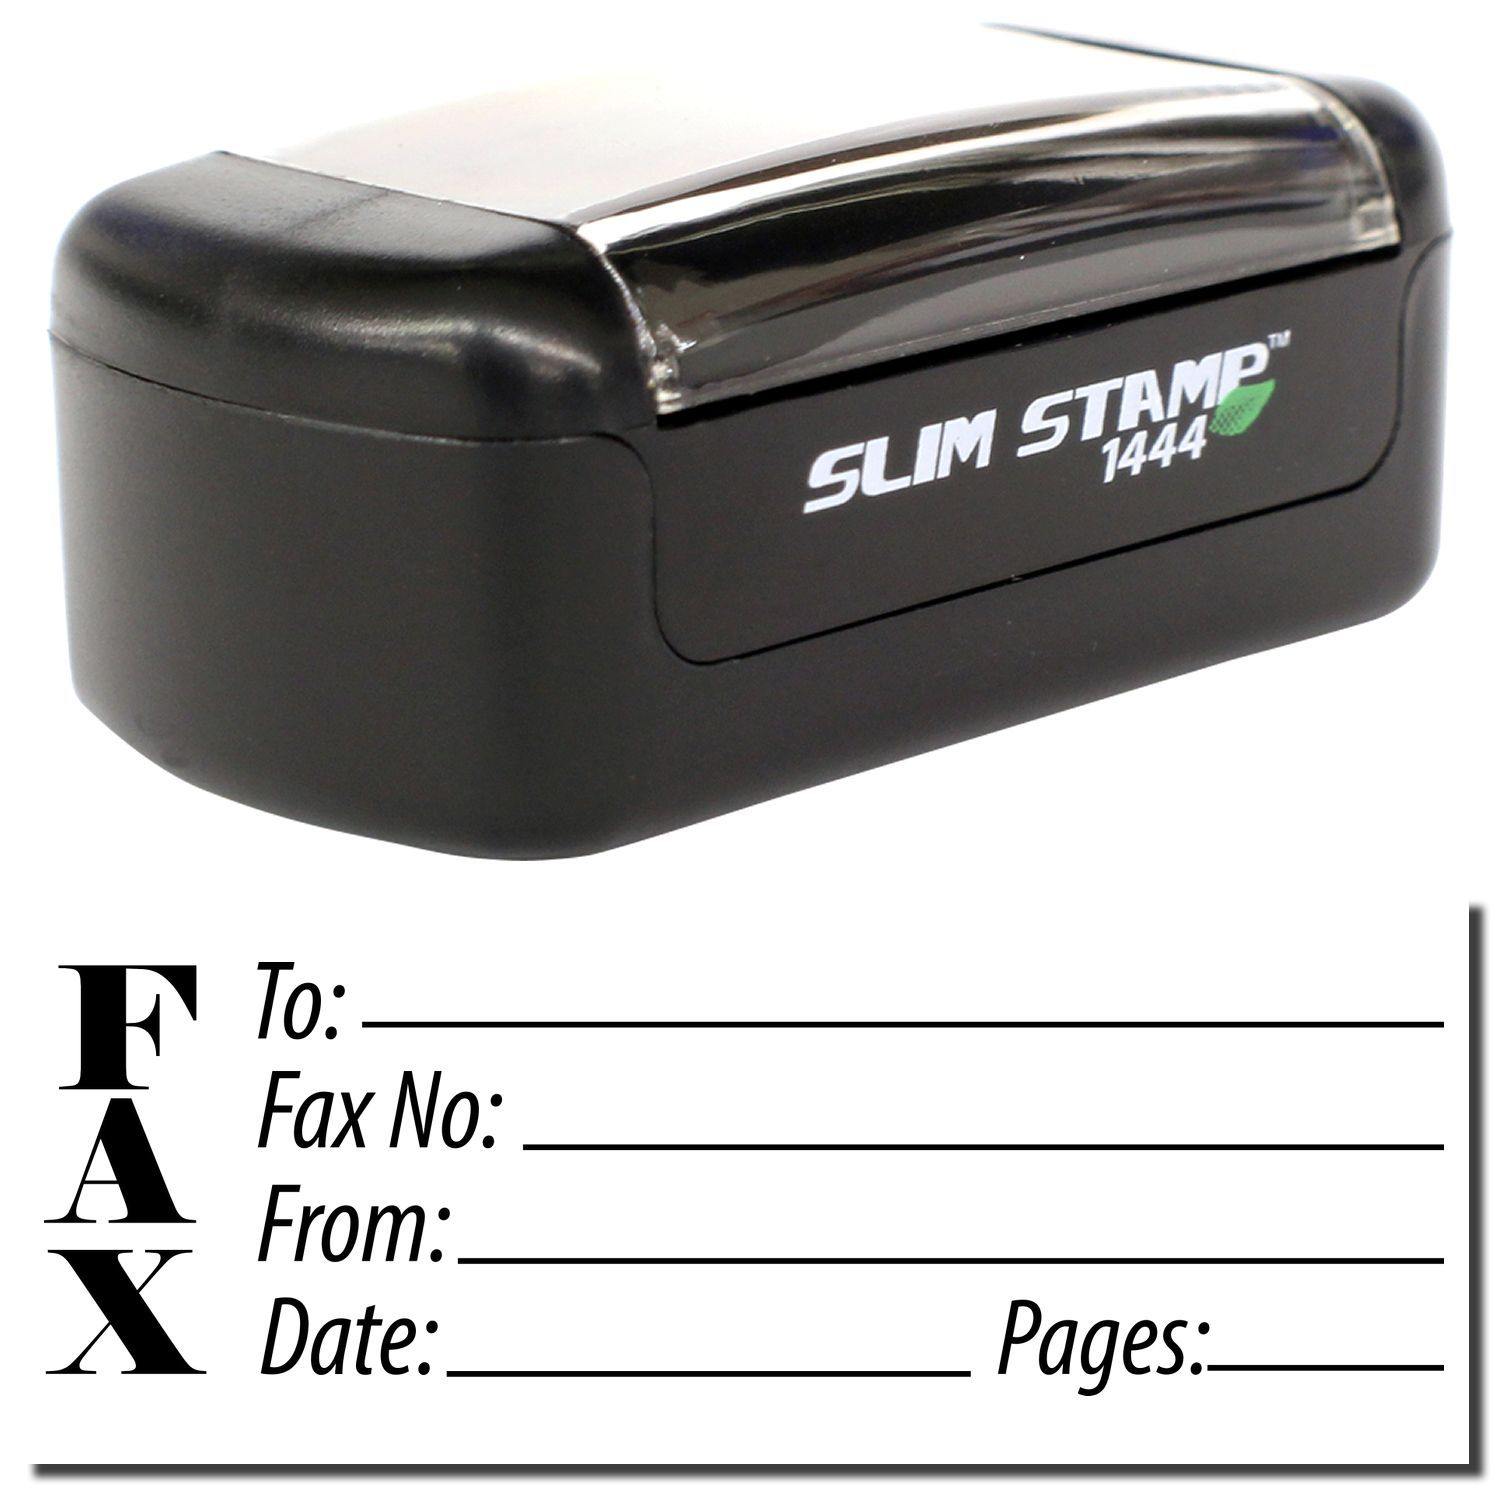 A stock office pre-inked stamp with a stamped image showing how the text "FAX" is displayed vertically with a form for filling in details of the fax like whom the fax is being sent to, fax number, who is sending the fax, date, and number of pages is shown after stamping from it.